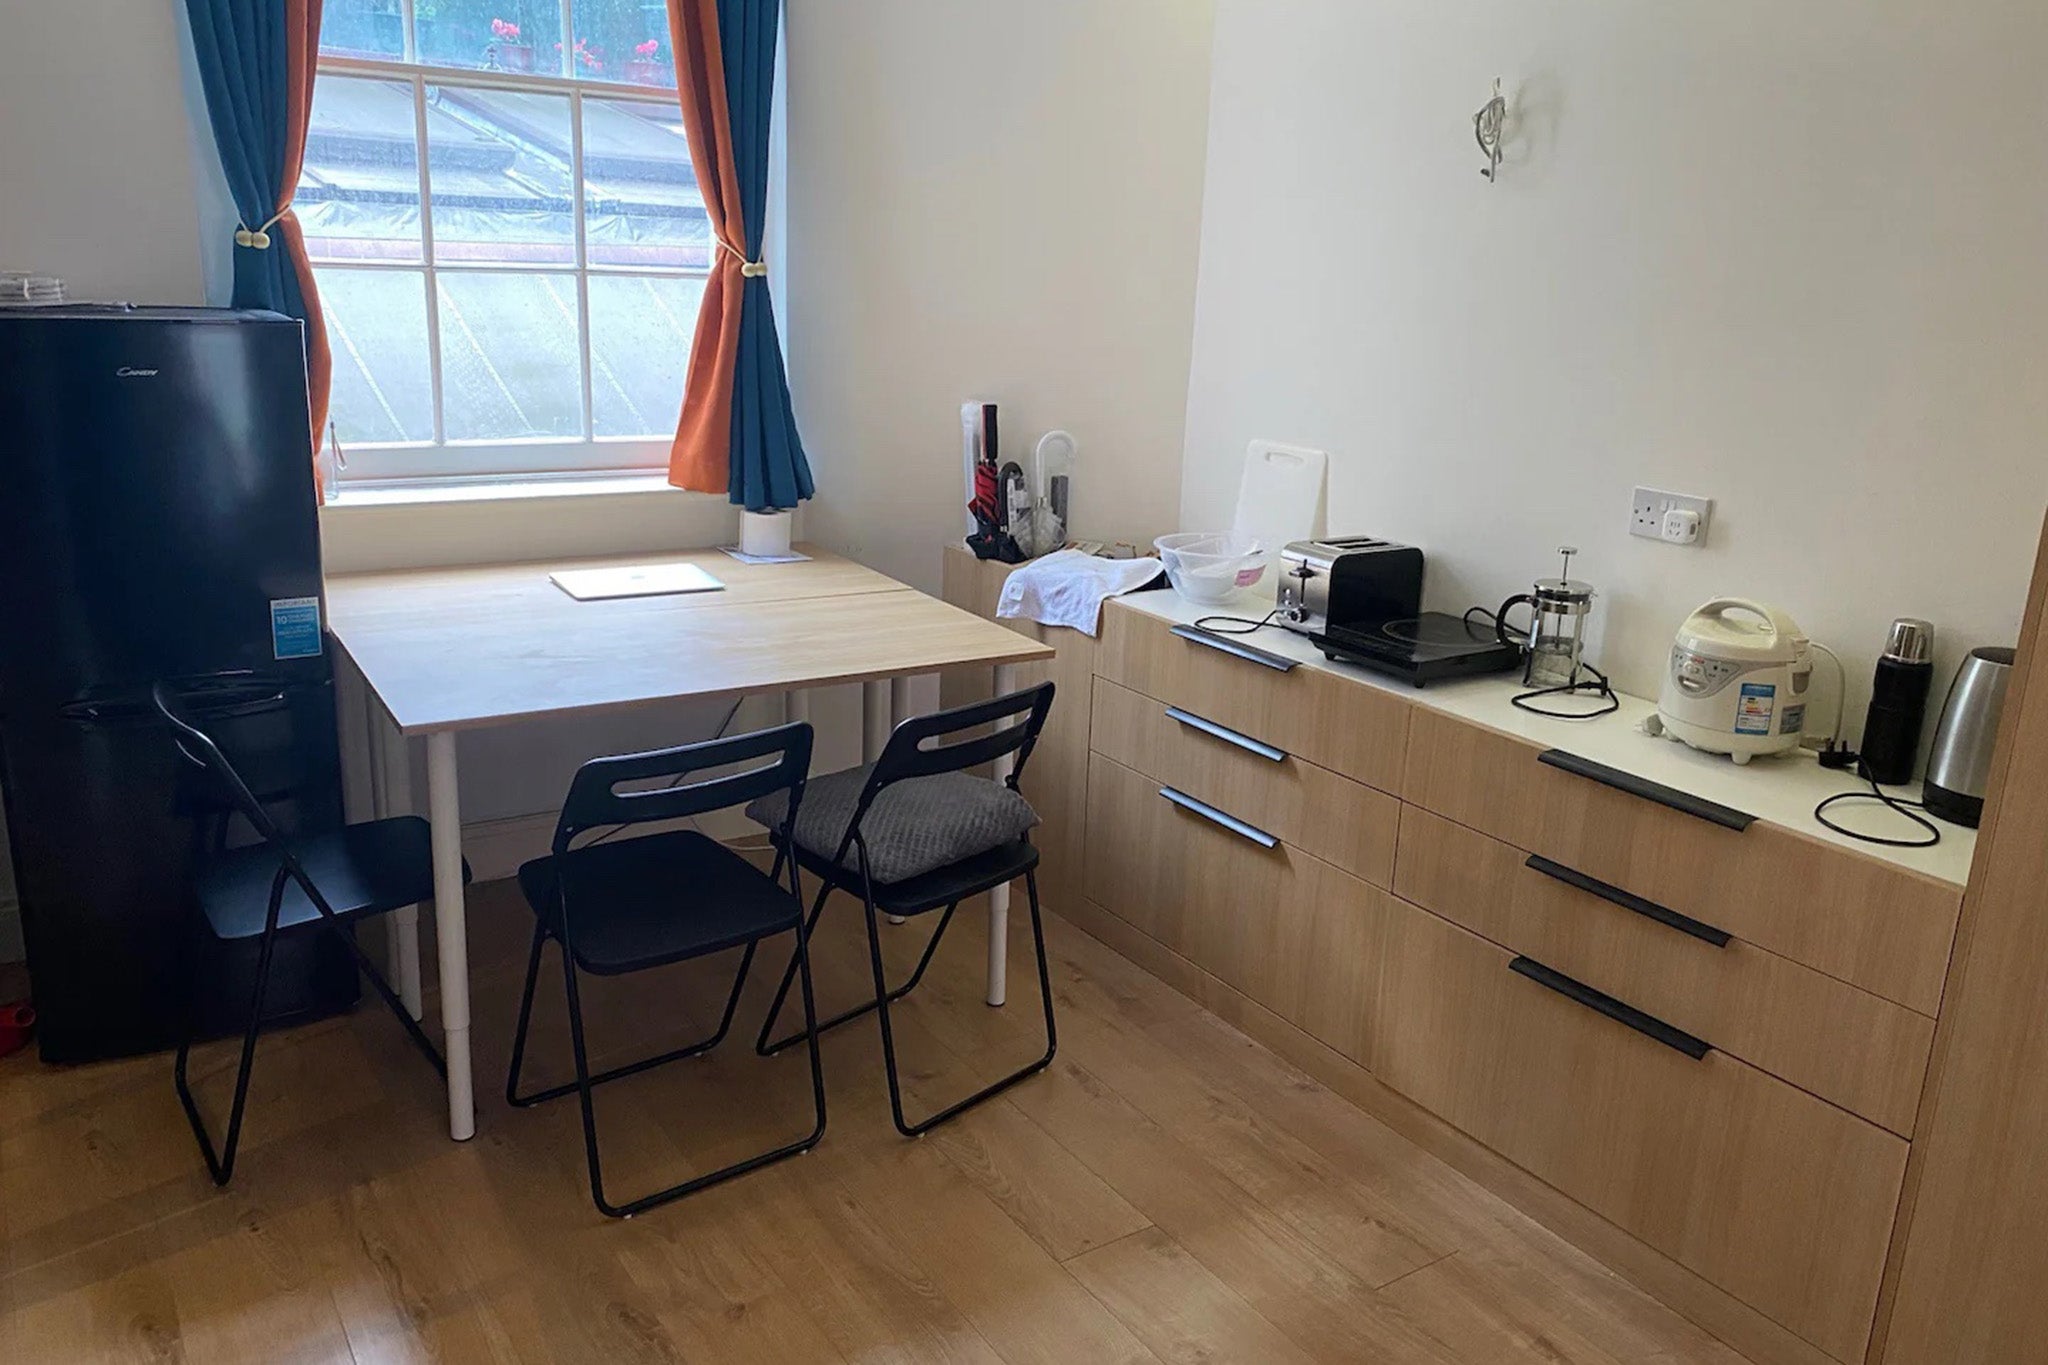 The property has a desk for anyone looking to do some work